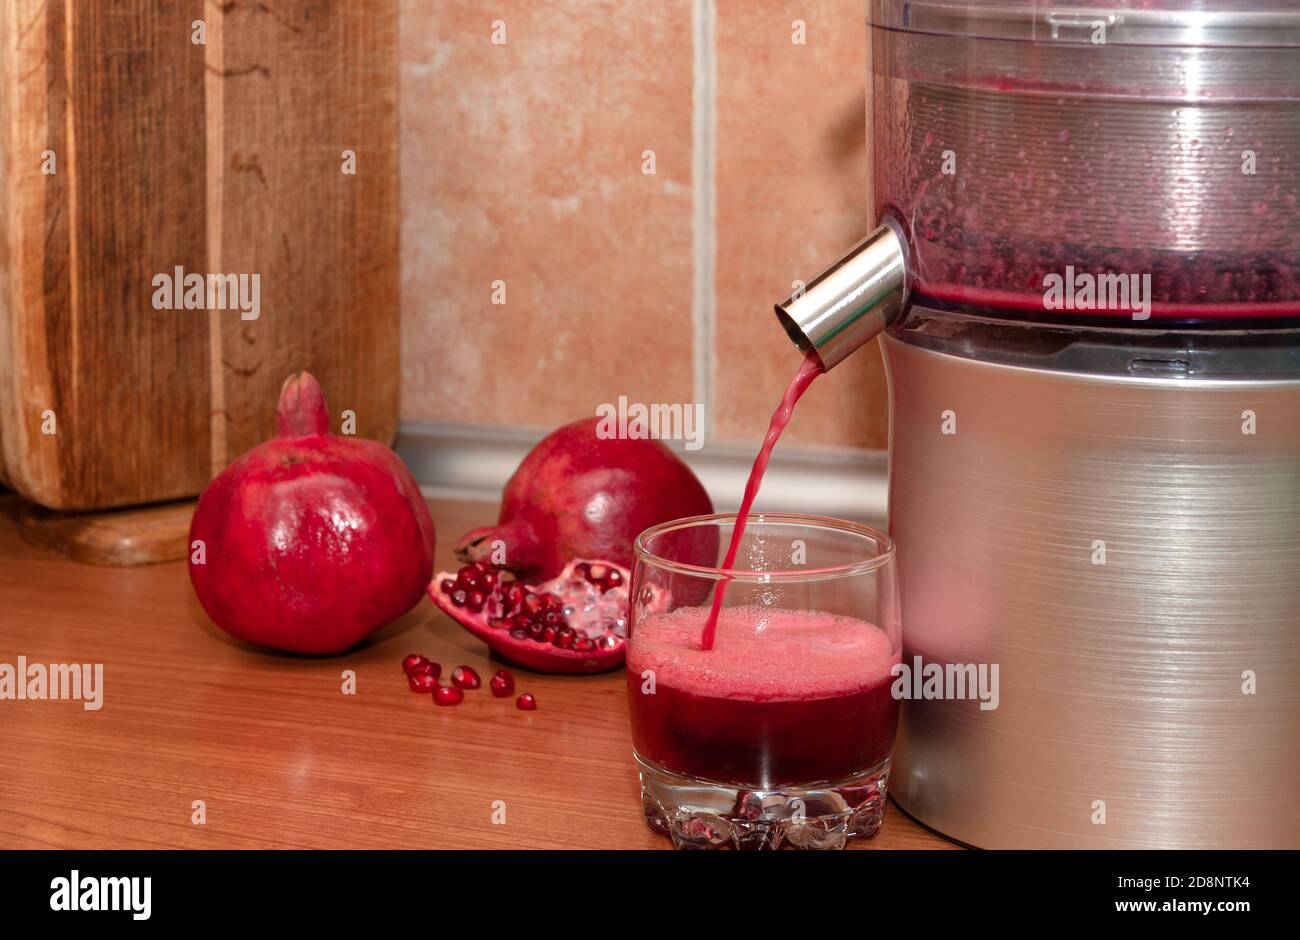 https://c8.alamy.com/comp/2D8NTK4/pomegranate-juice-pours-from-a-juicer-into-a-glass-making-juice-at-home-2D8NTK4.jpg